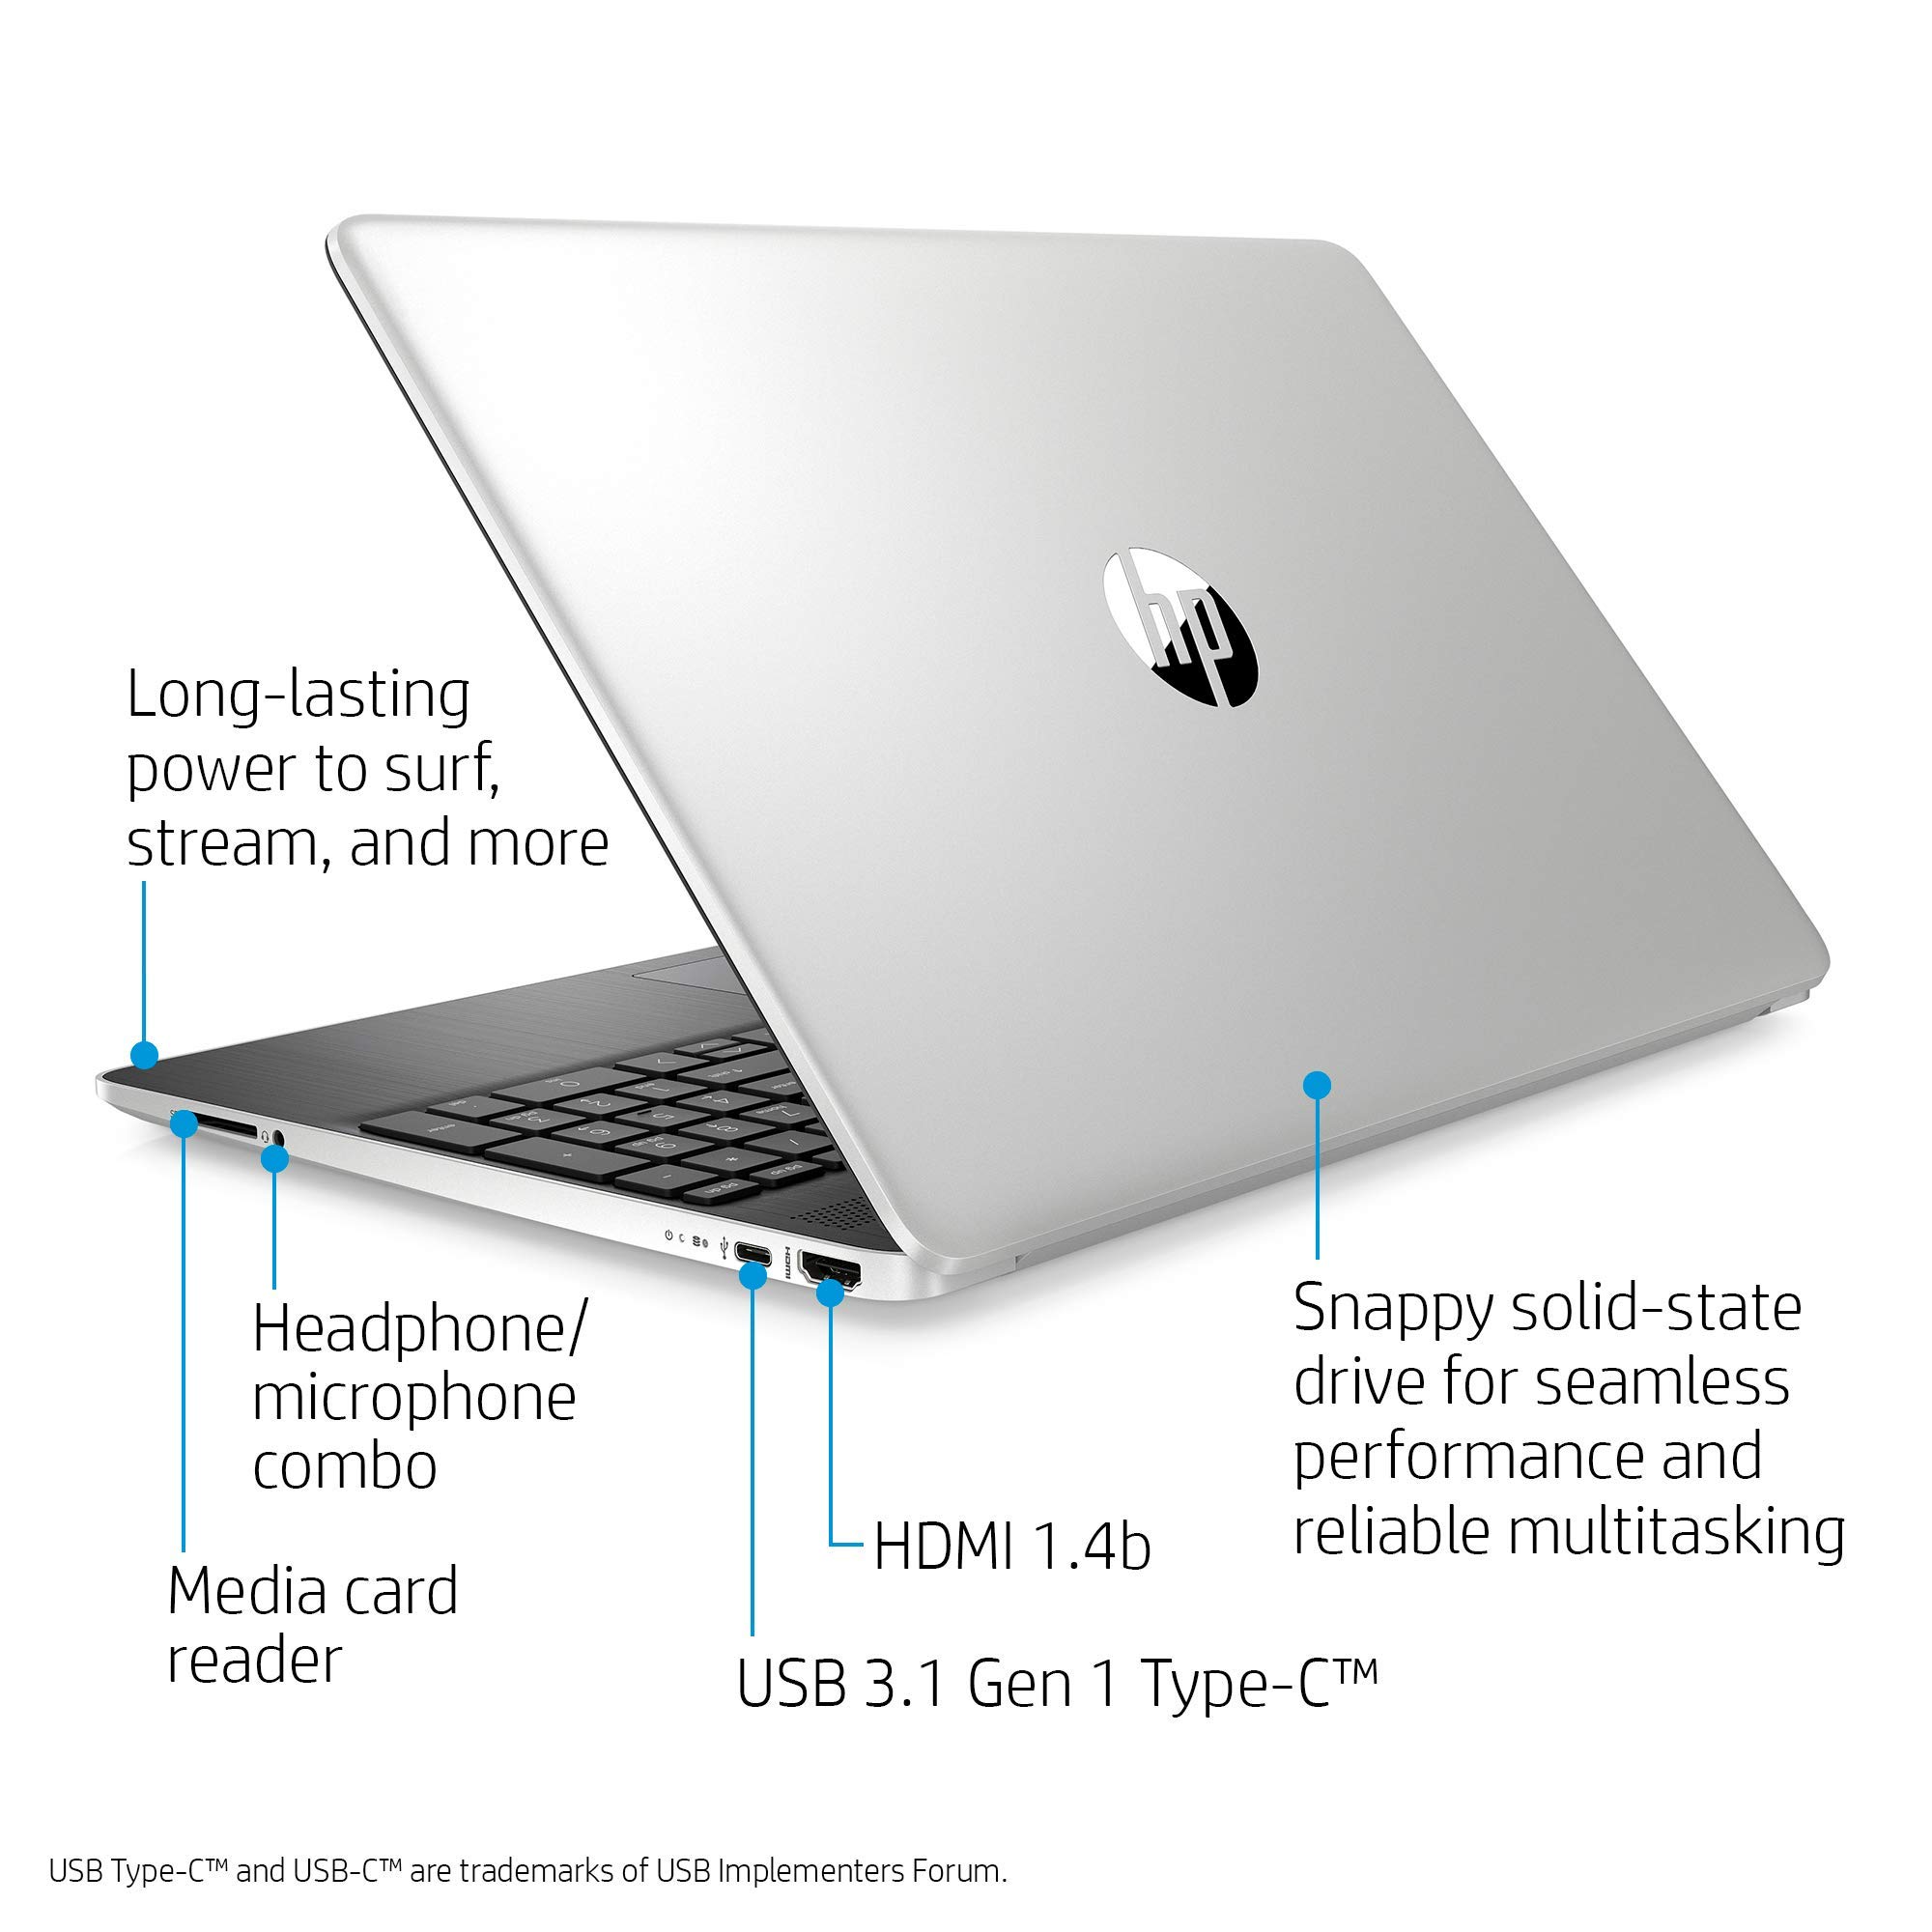 HP 15-Inch HD Touchscreen Laptop, 10th Gen Intel Core i5-1035G1, 8 GB SDRAM, 512 GB Solid-State Drive, Windows 10 Home (15-dy1020nr, Natural Silver), 15-15.99 inches (Renewed)